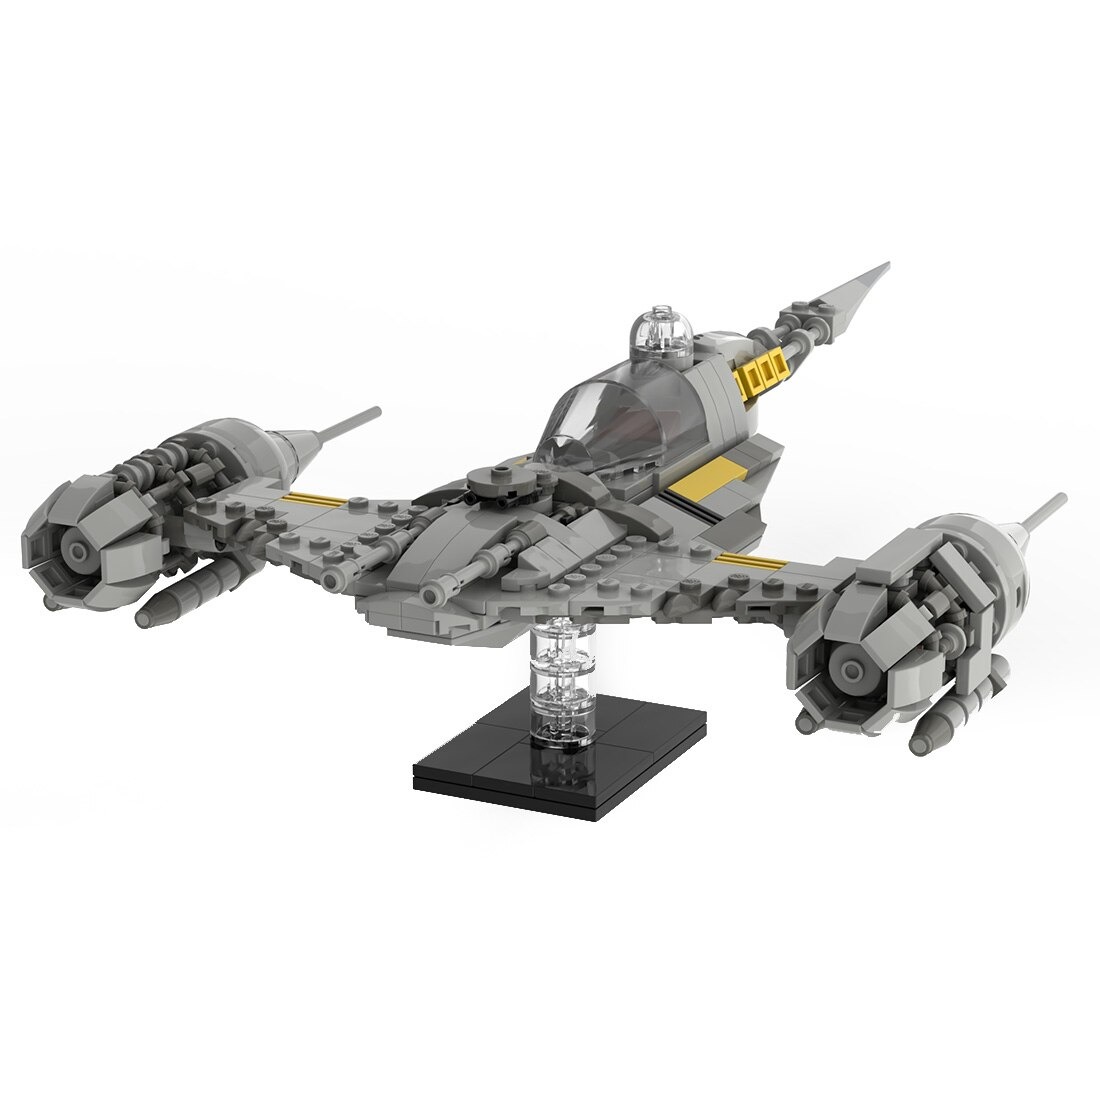 authorized moc 100546 n 1 starfighter bui main 4 1 - MOULD KING